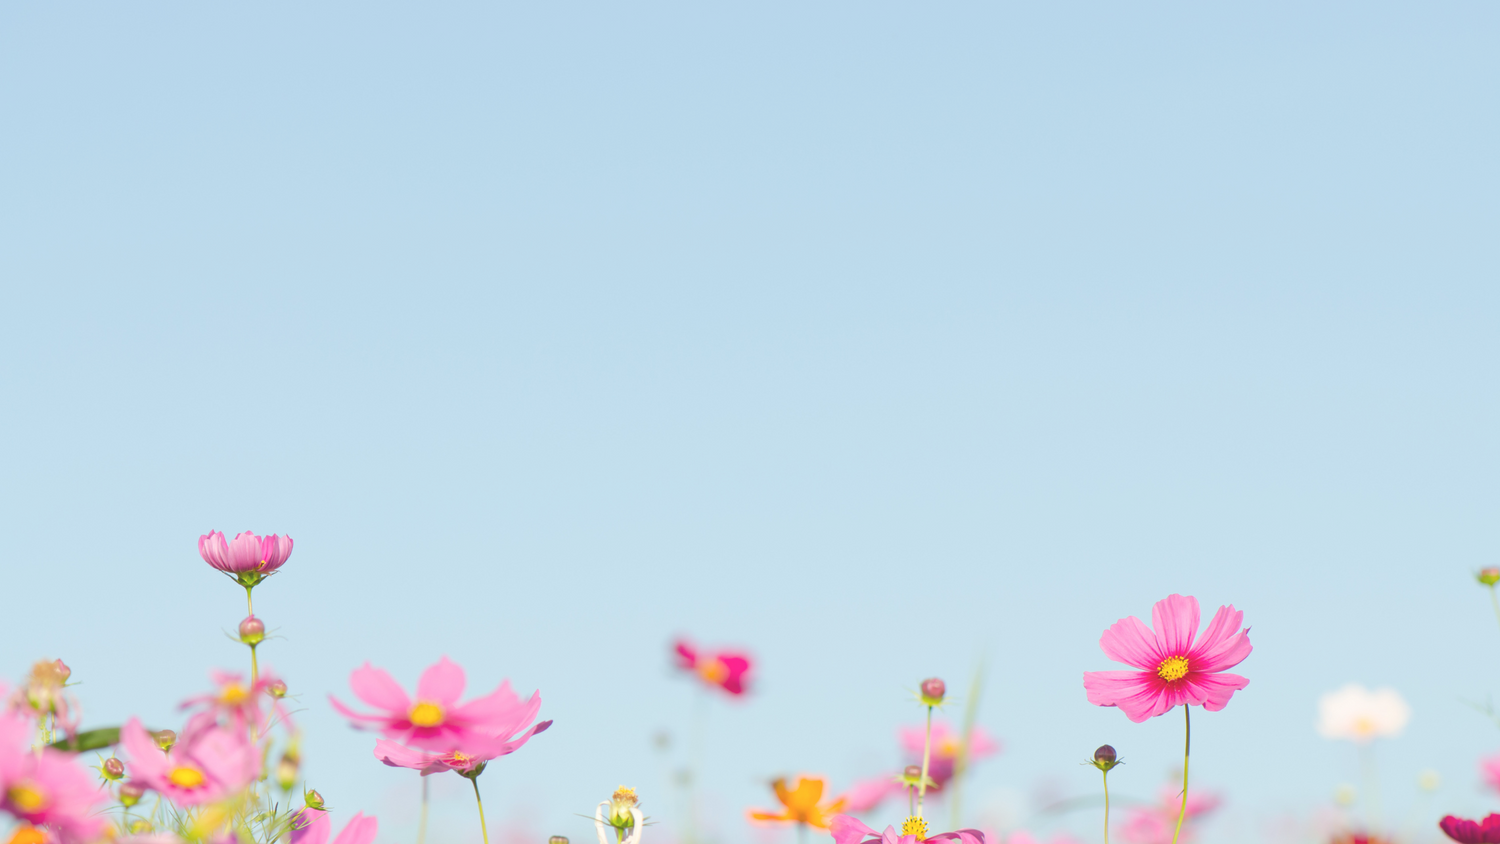 Pink daisies in bloom and in bud gathered at the bottom of the image, with a clear blue stretch of sky